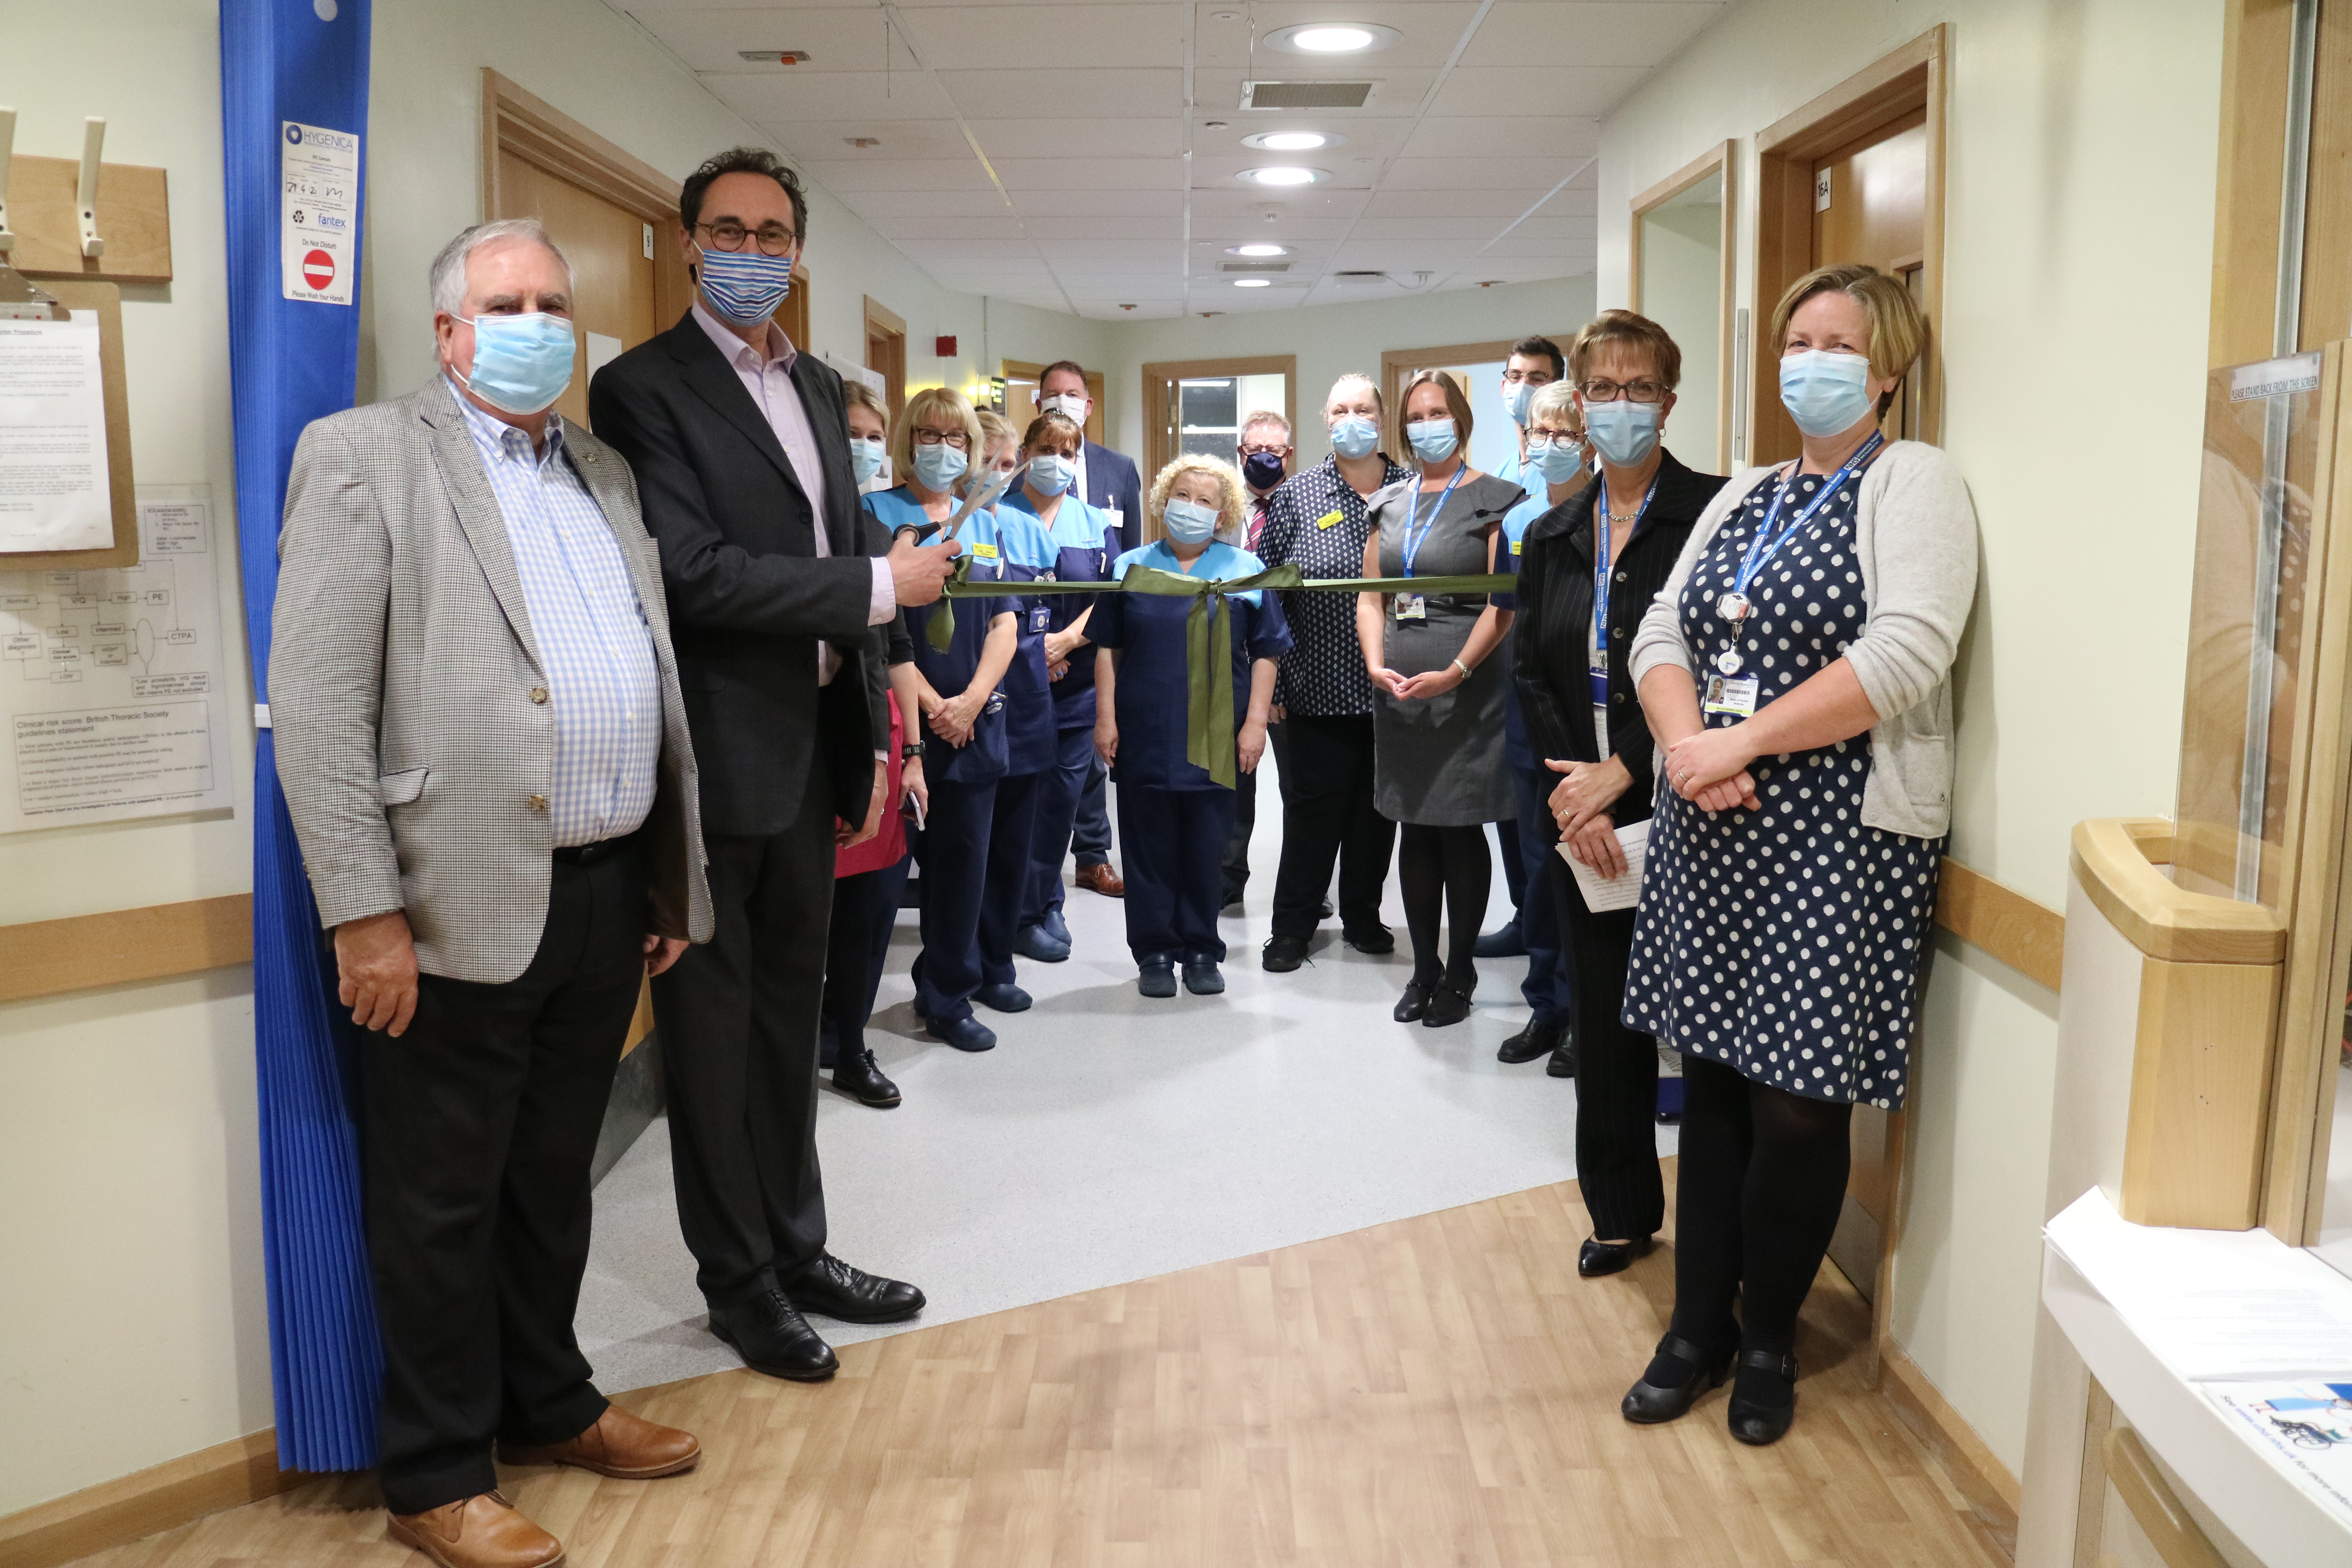 Holby star officially opens new hospital diagnostic scanners